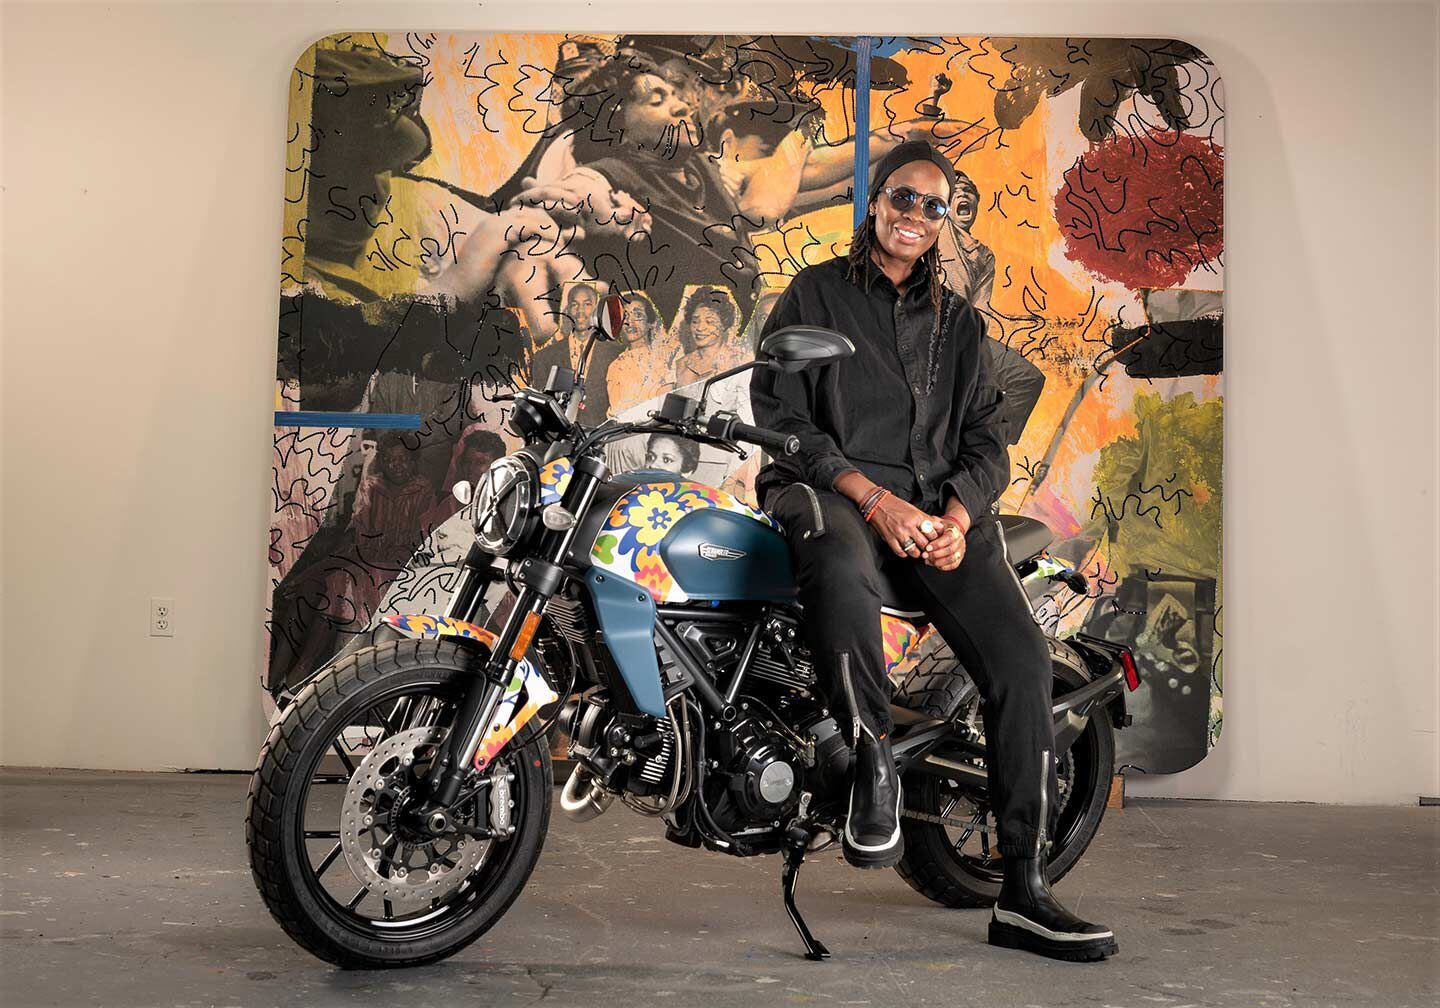 Ducati and its partners commissioned contemporary artist Mickalene Thomas to work her visual magic on a new Icon model.